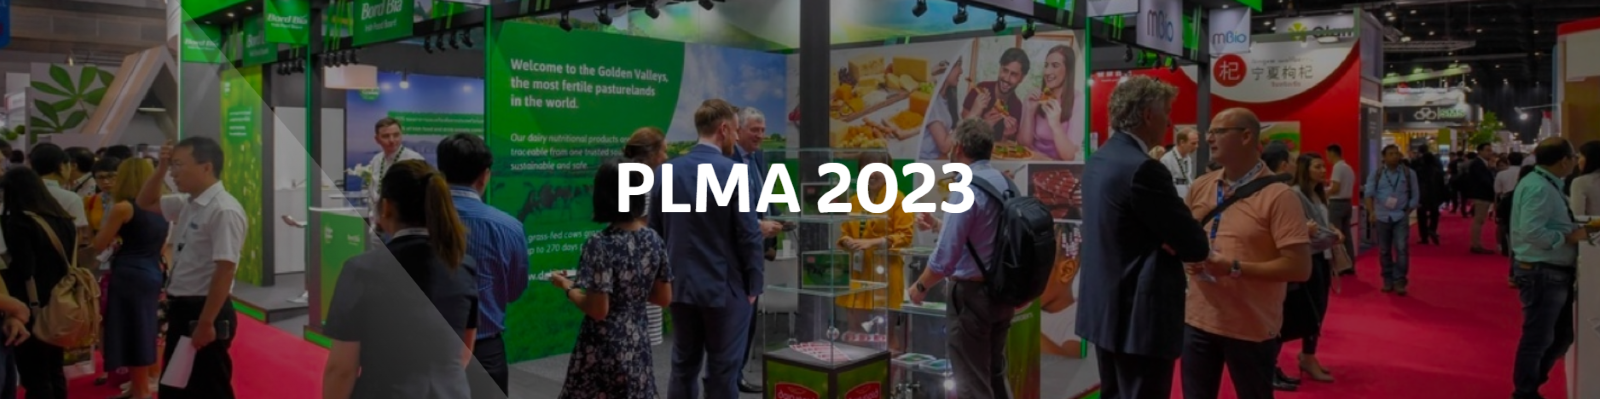 PLMA 2023: Trends and Opportunities for Private Label in Europe